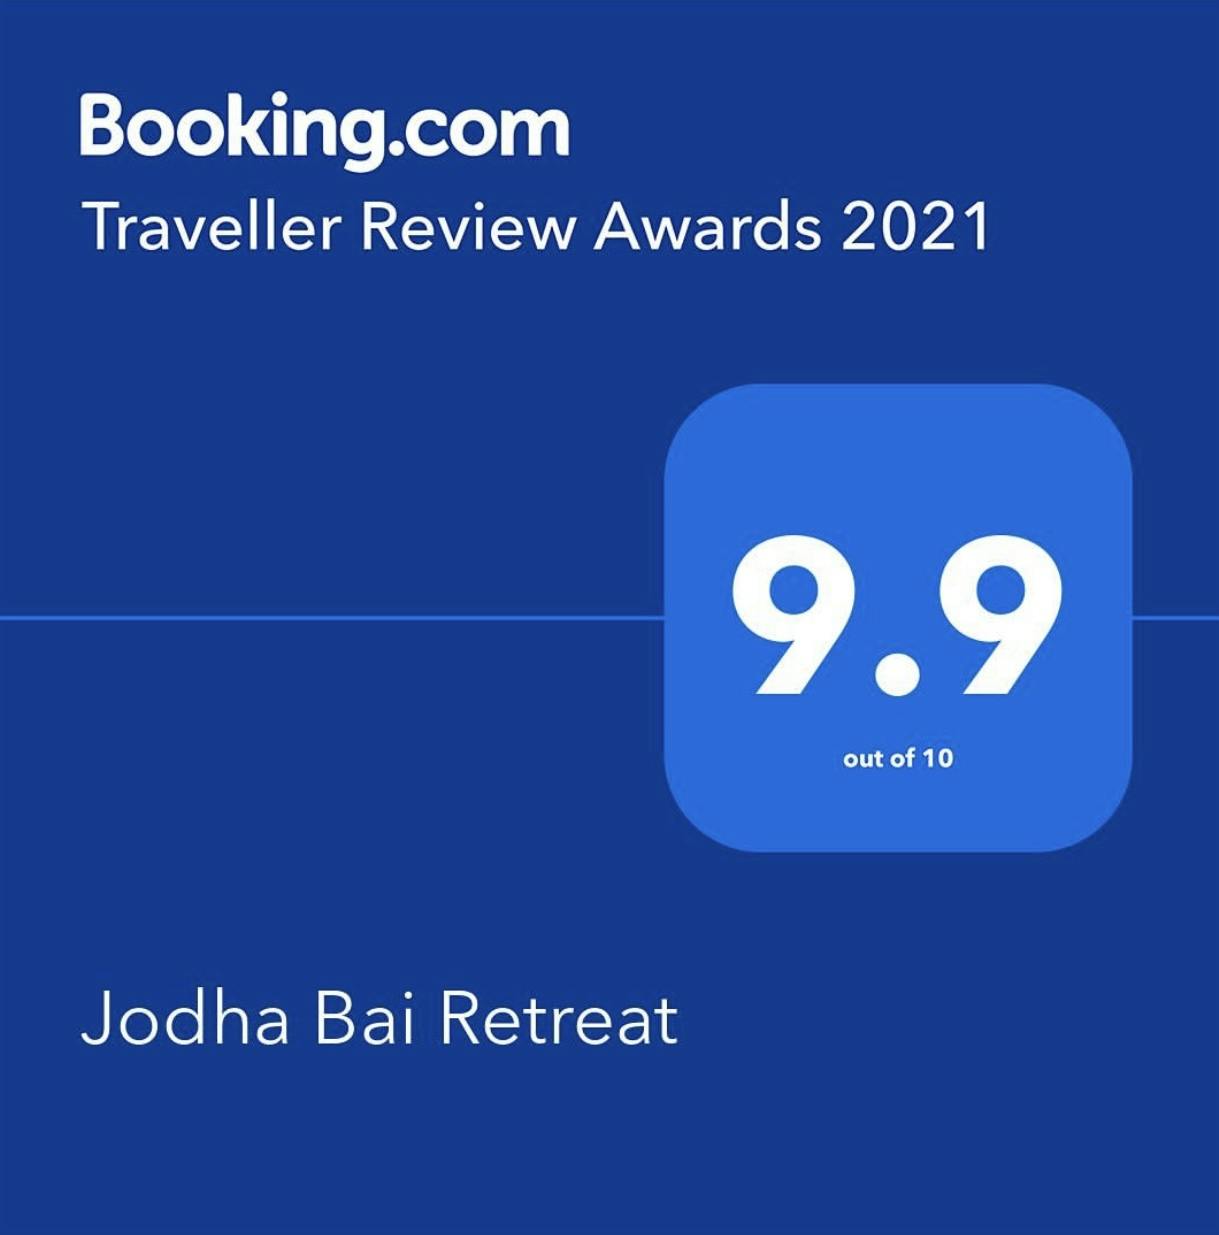 9.9 Booking.com rating, three consecutive awards for 9.9 rating in 2021, 2022 & 2023. Highest Booking.com property on coast